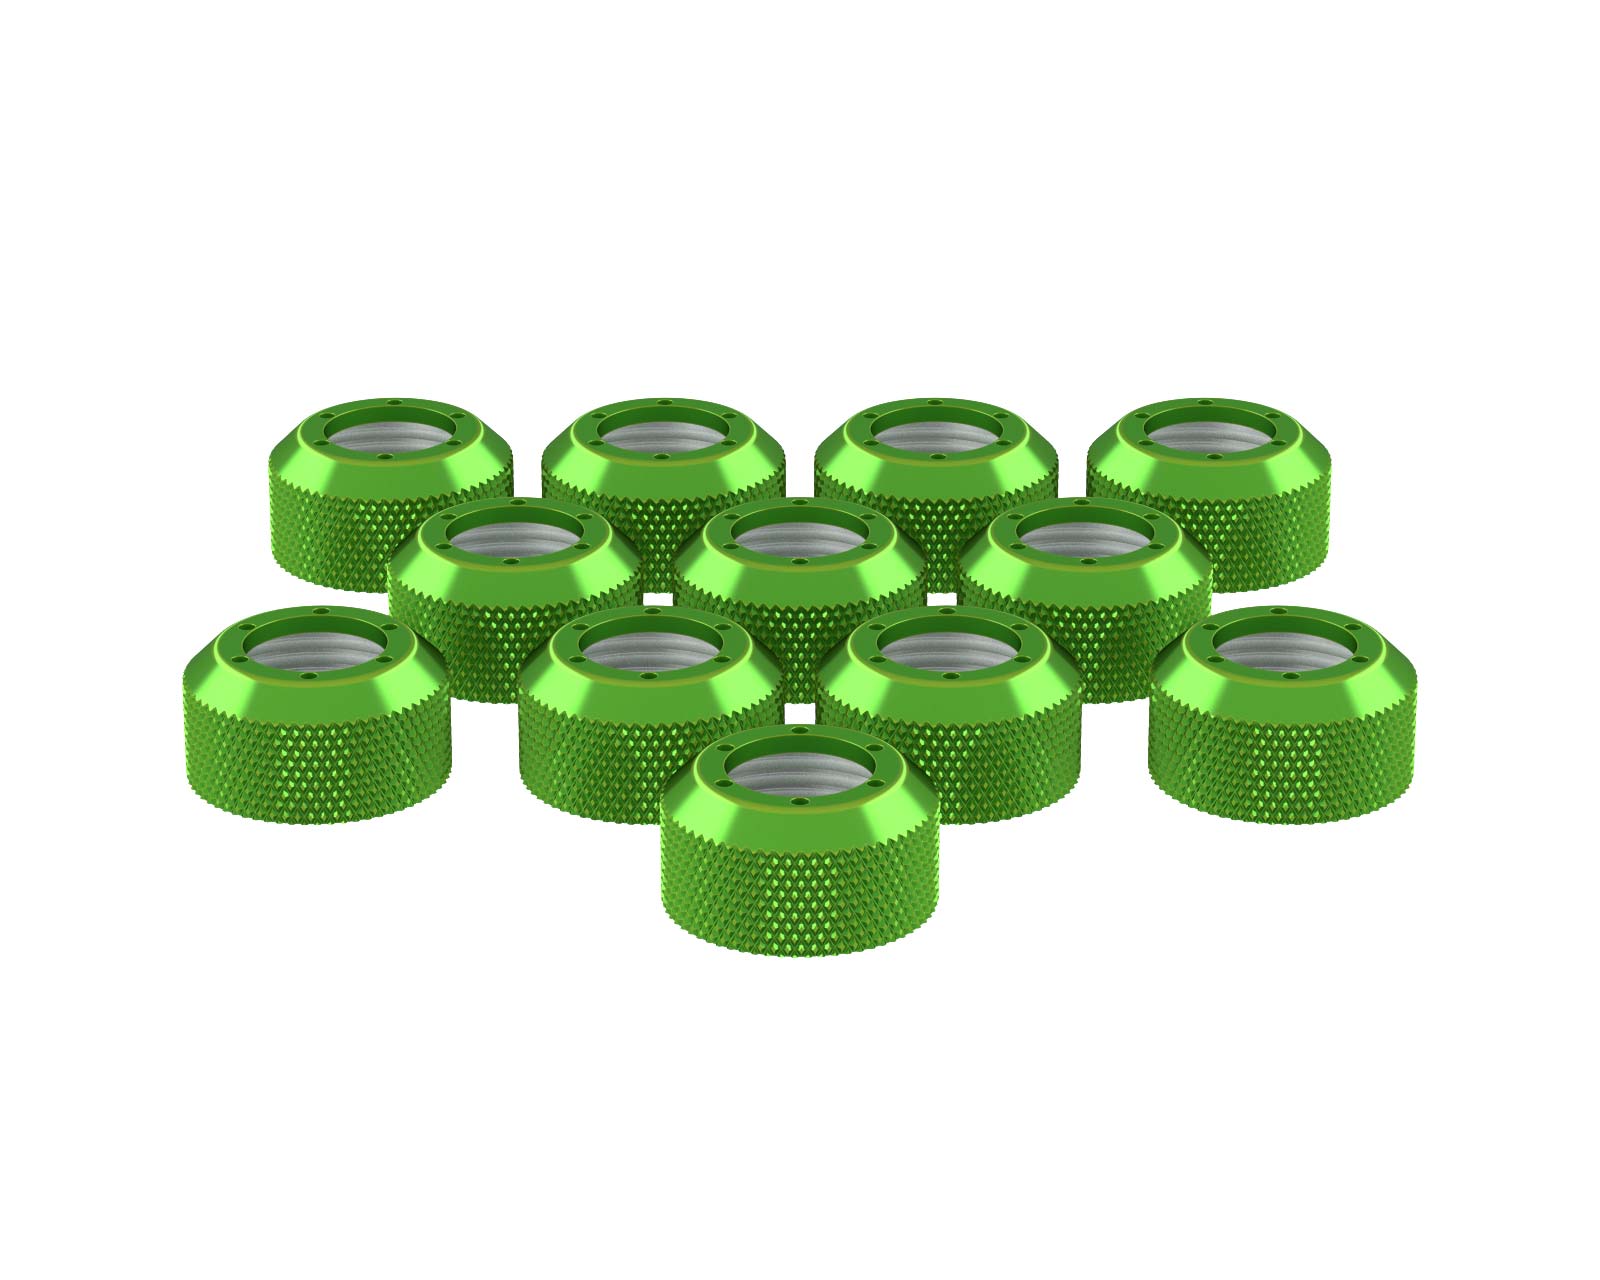 PrimoChill RSX Replacement Cap Switch Over Kit - 1/2in. - PrimoChill - KEEPING IT COOL Toxic Candy